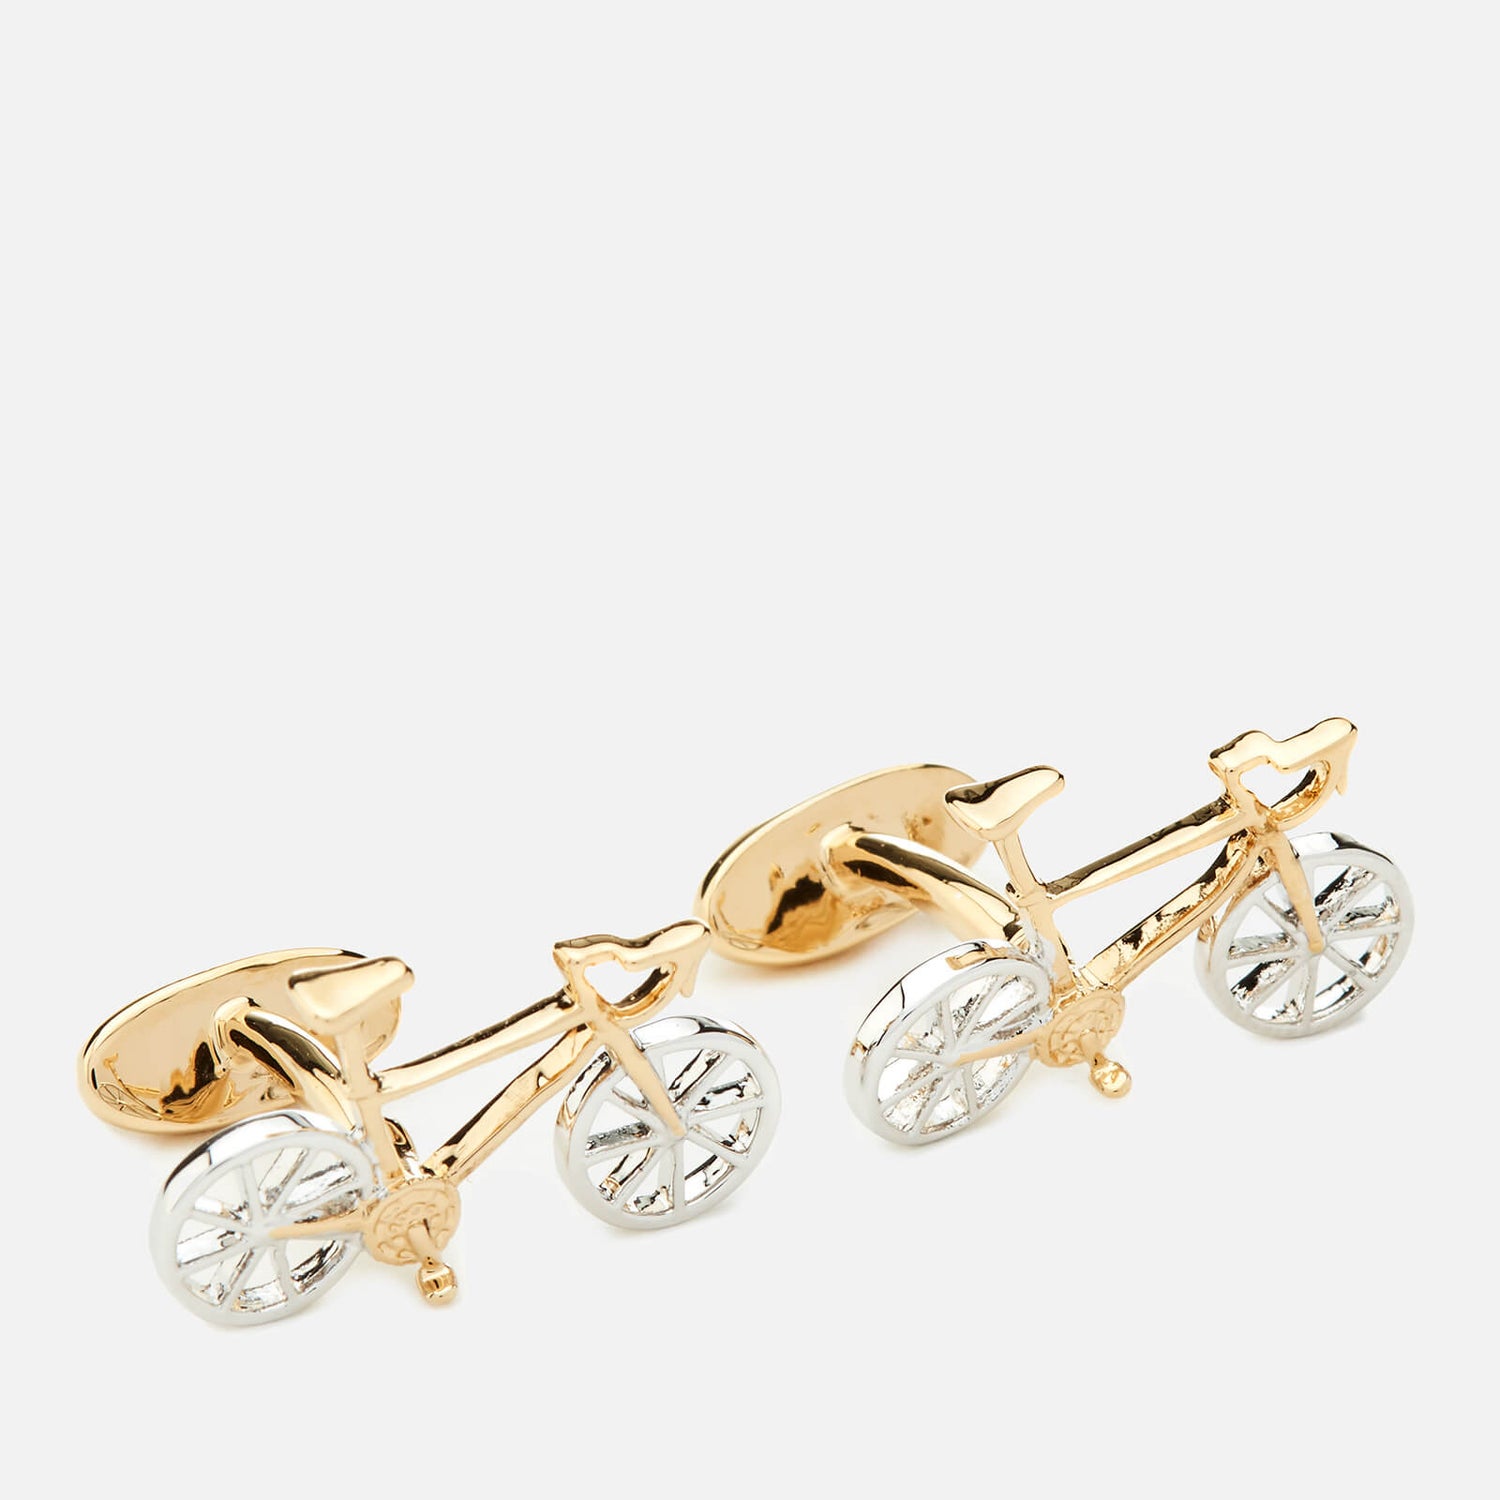 Paul Smith Men's Racing Bike Cufflinks - Brass - Free UK Delivery Available